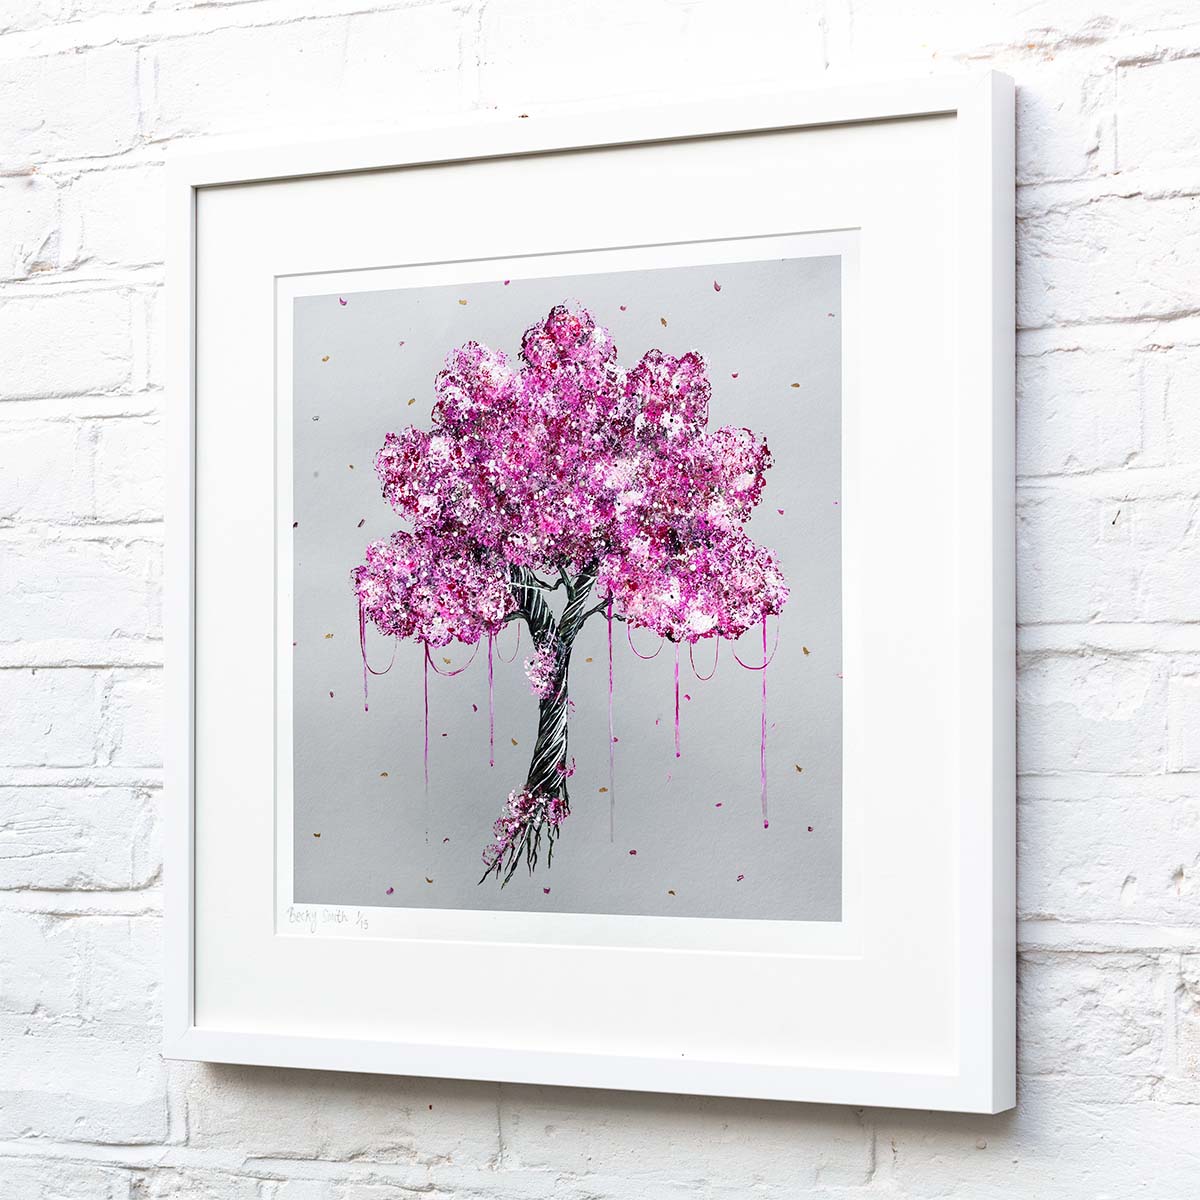 Blossom in Bloom - Standard Edition Becky Smith